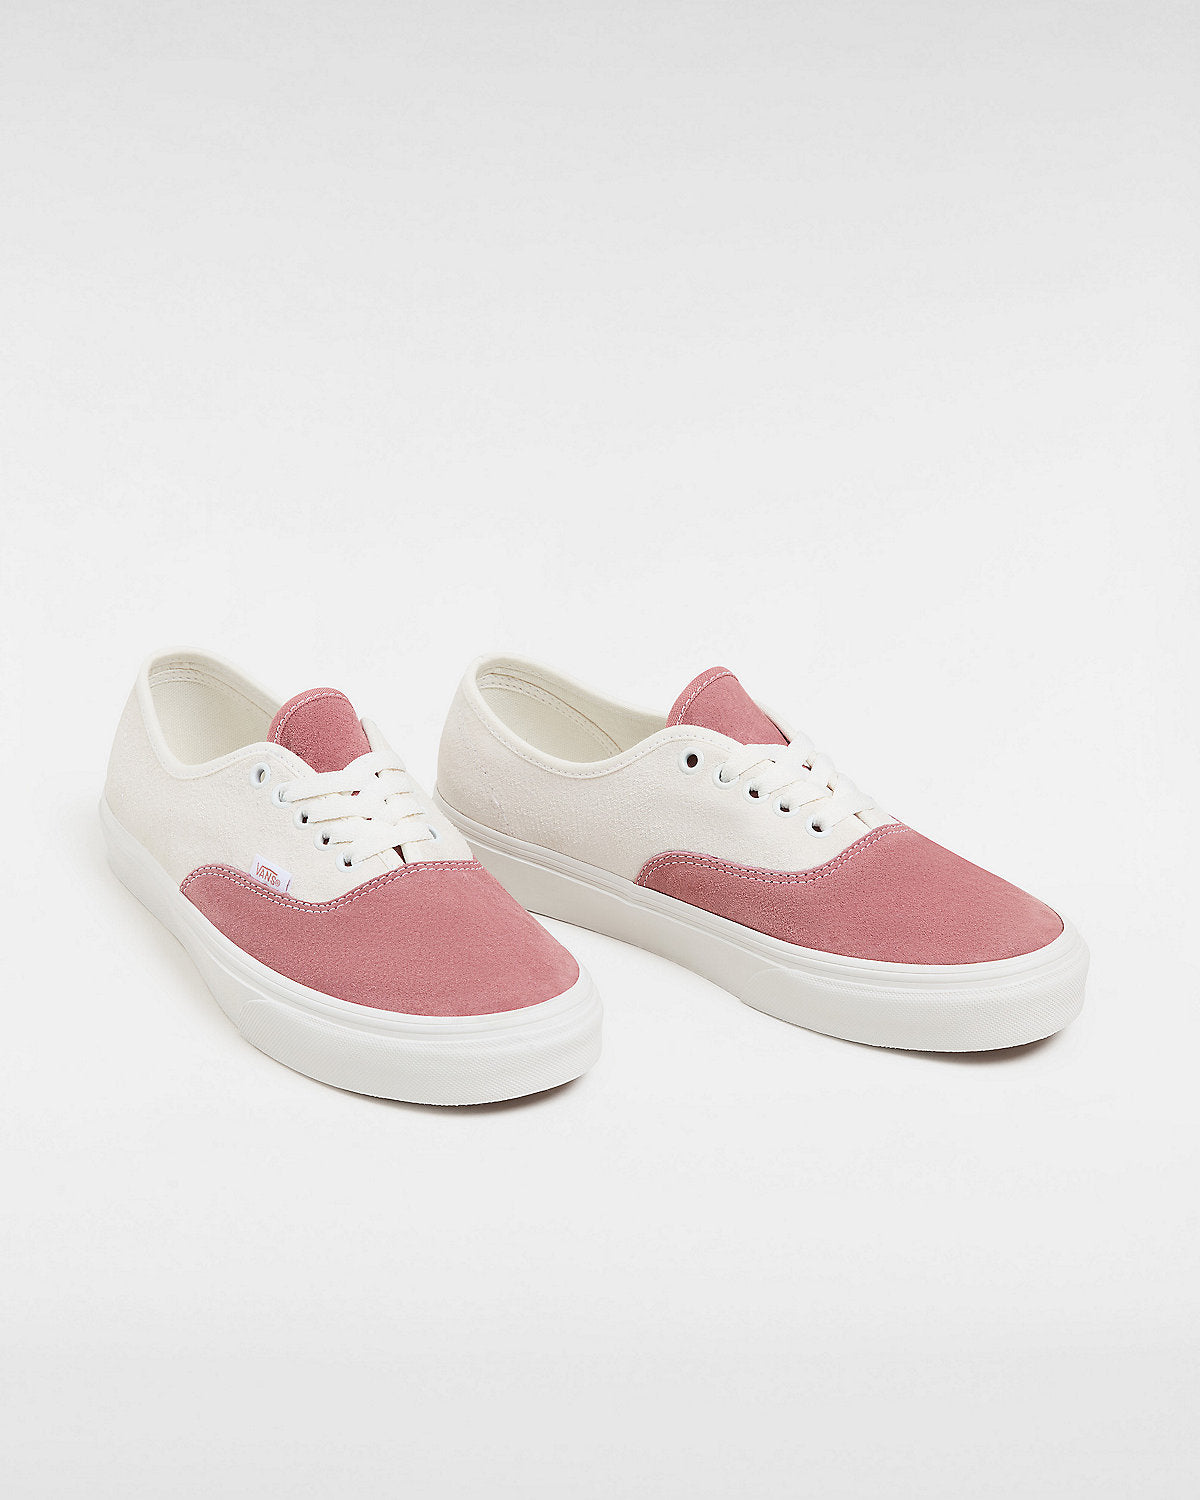 VANS Unisex Authentic Pig Suede Trainers - Withered Rose